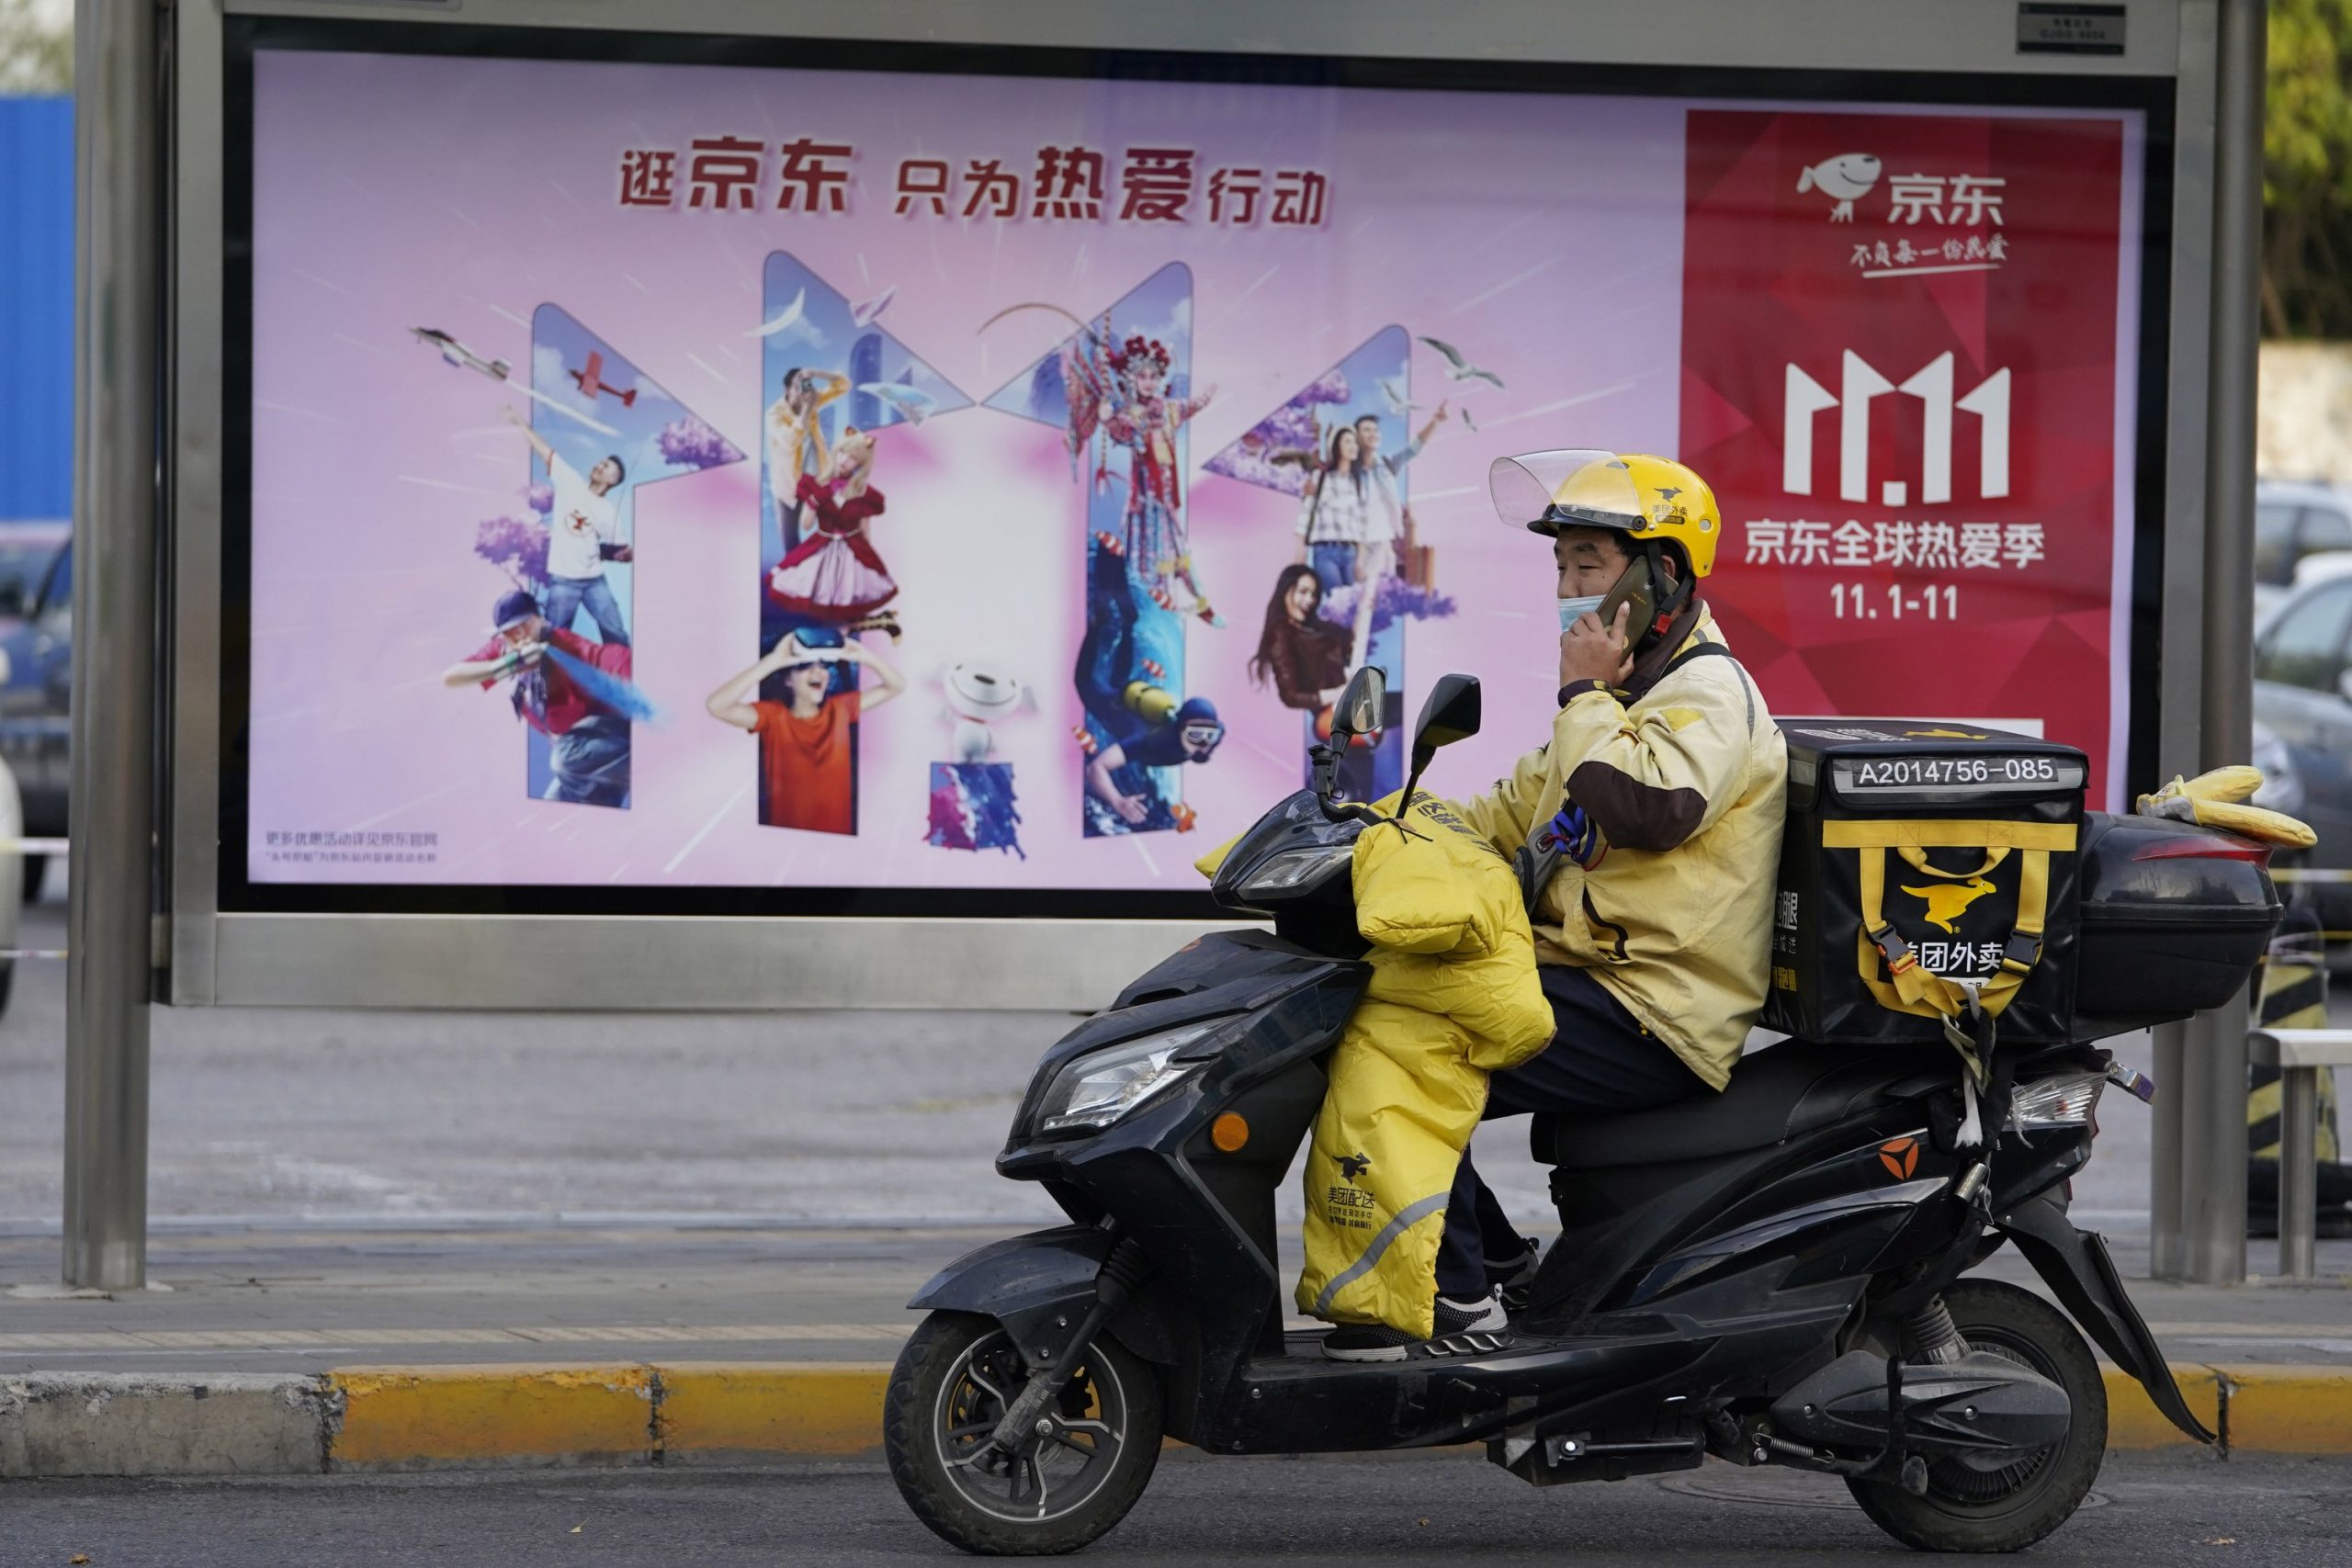 China is preparing for the largest online shopping festival in the world

